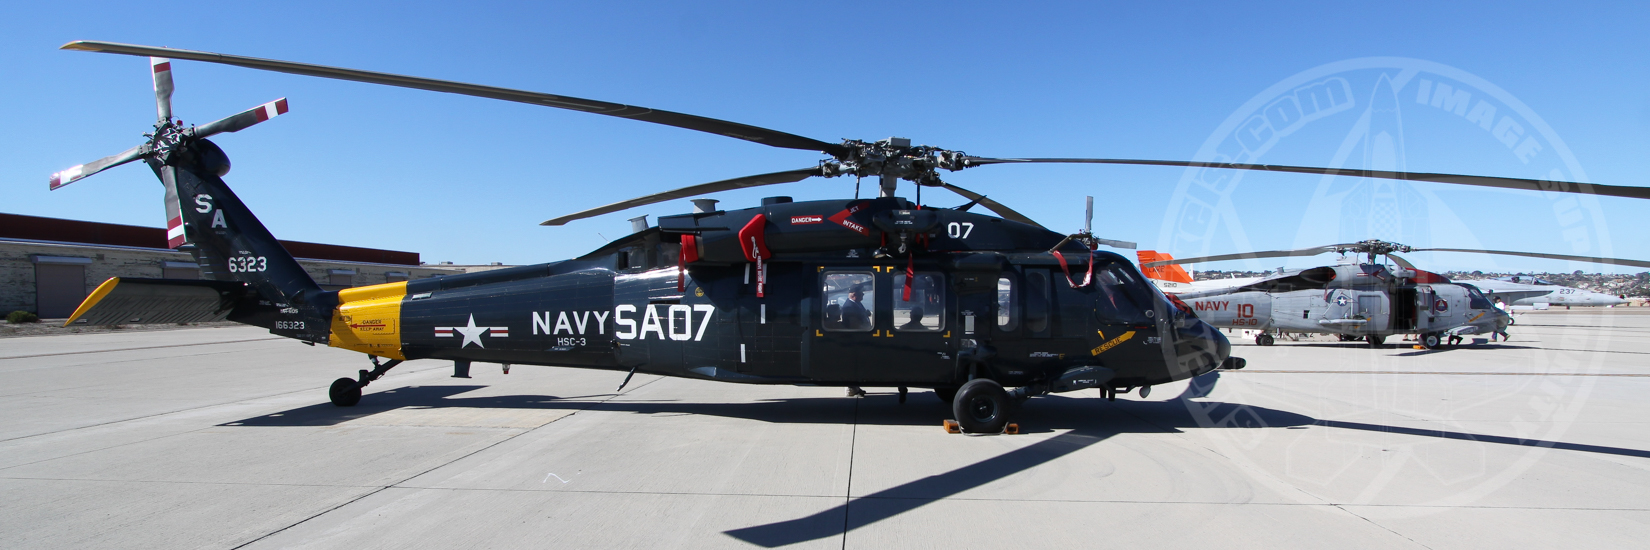 MH-60 and SH-60s in special centennial paint schemes